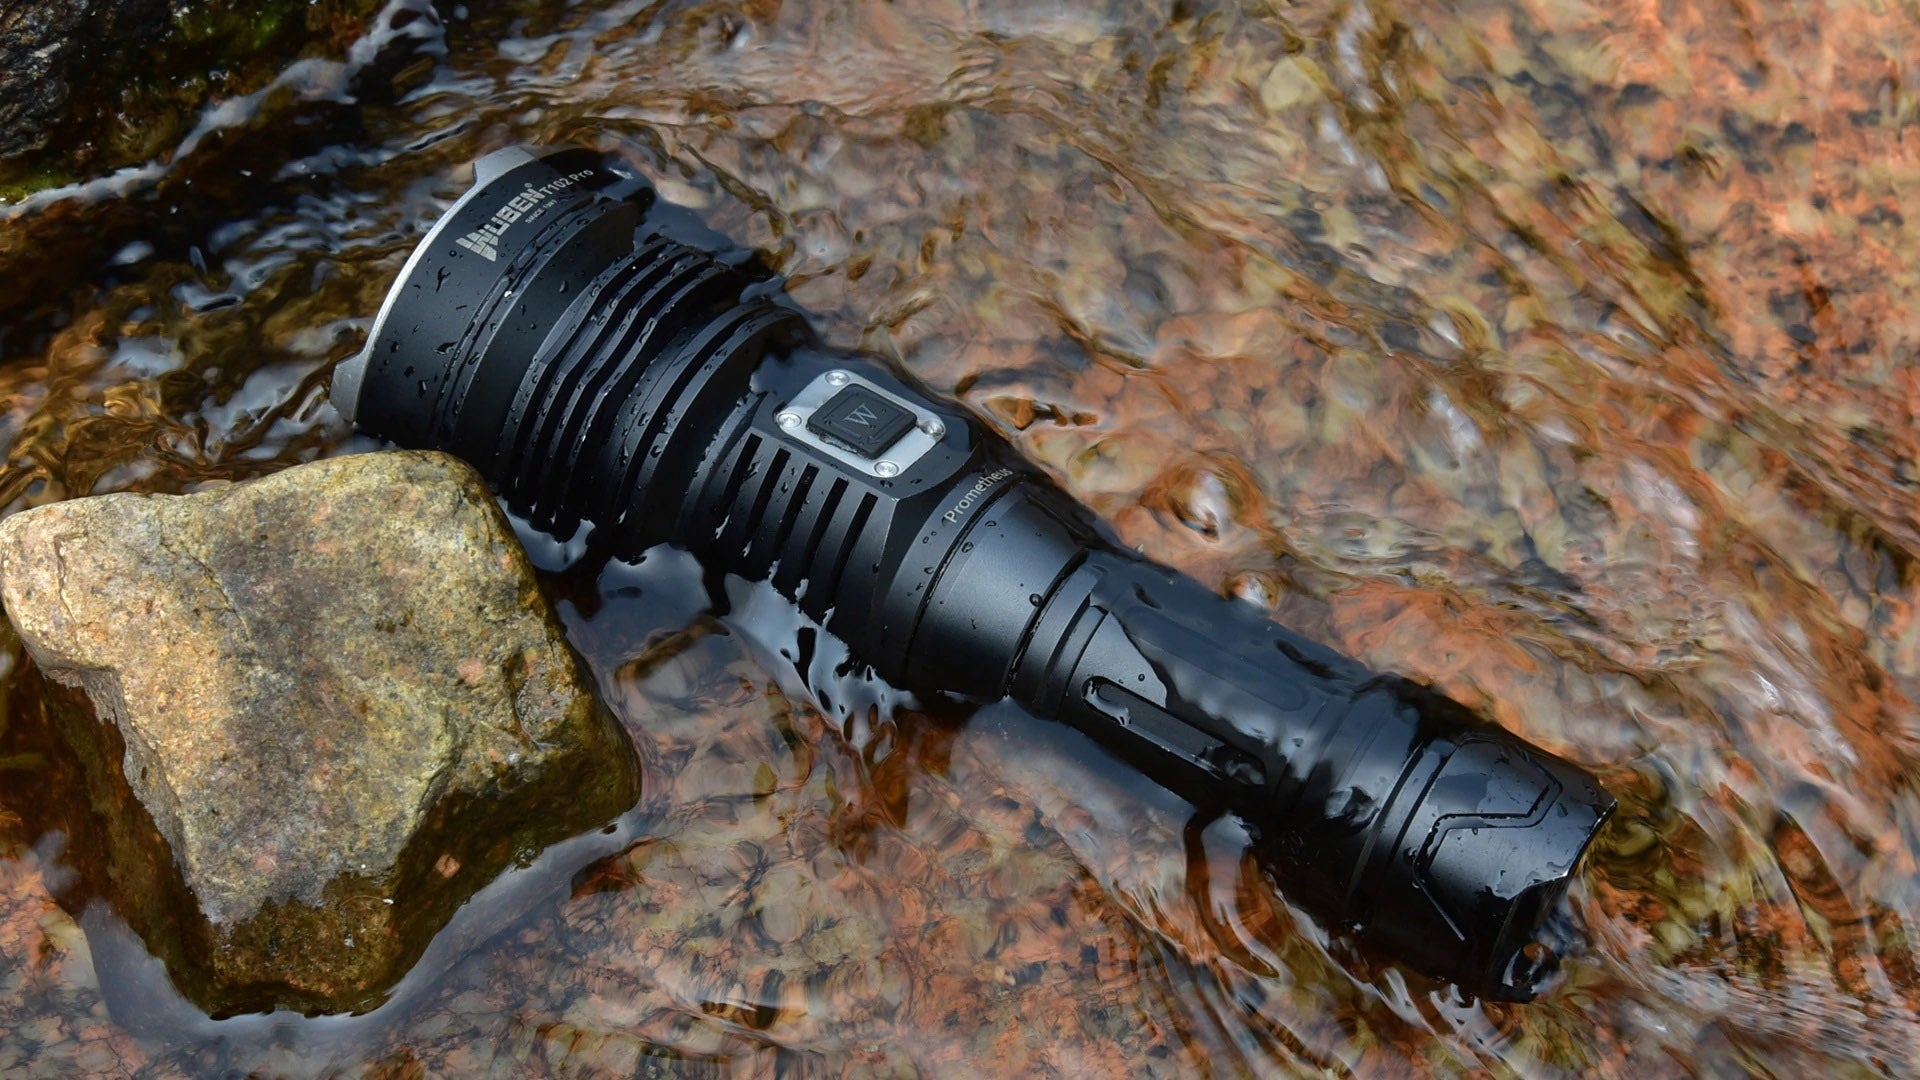 “Wuben t102 pro tactical flashlight in the water